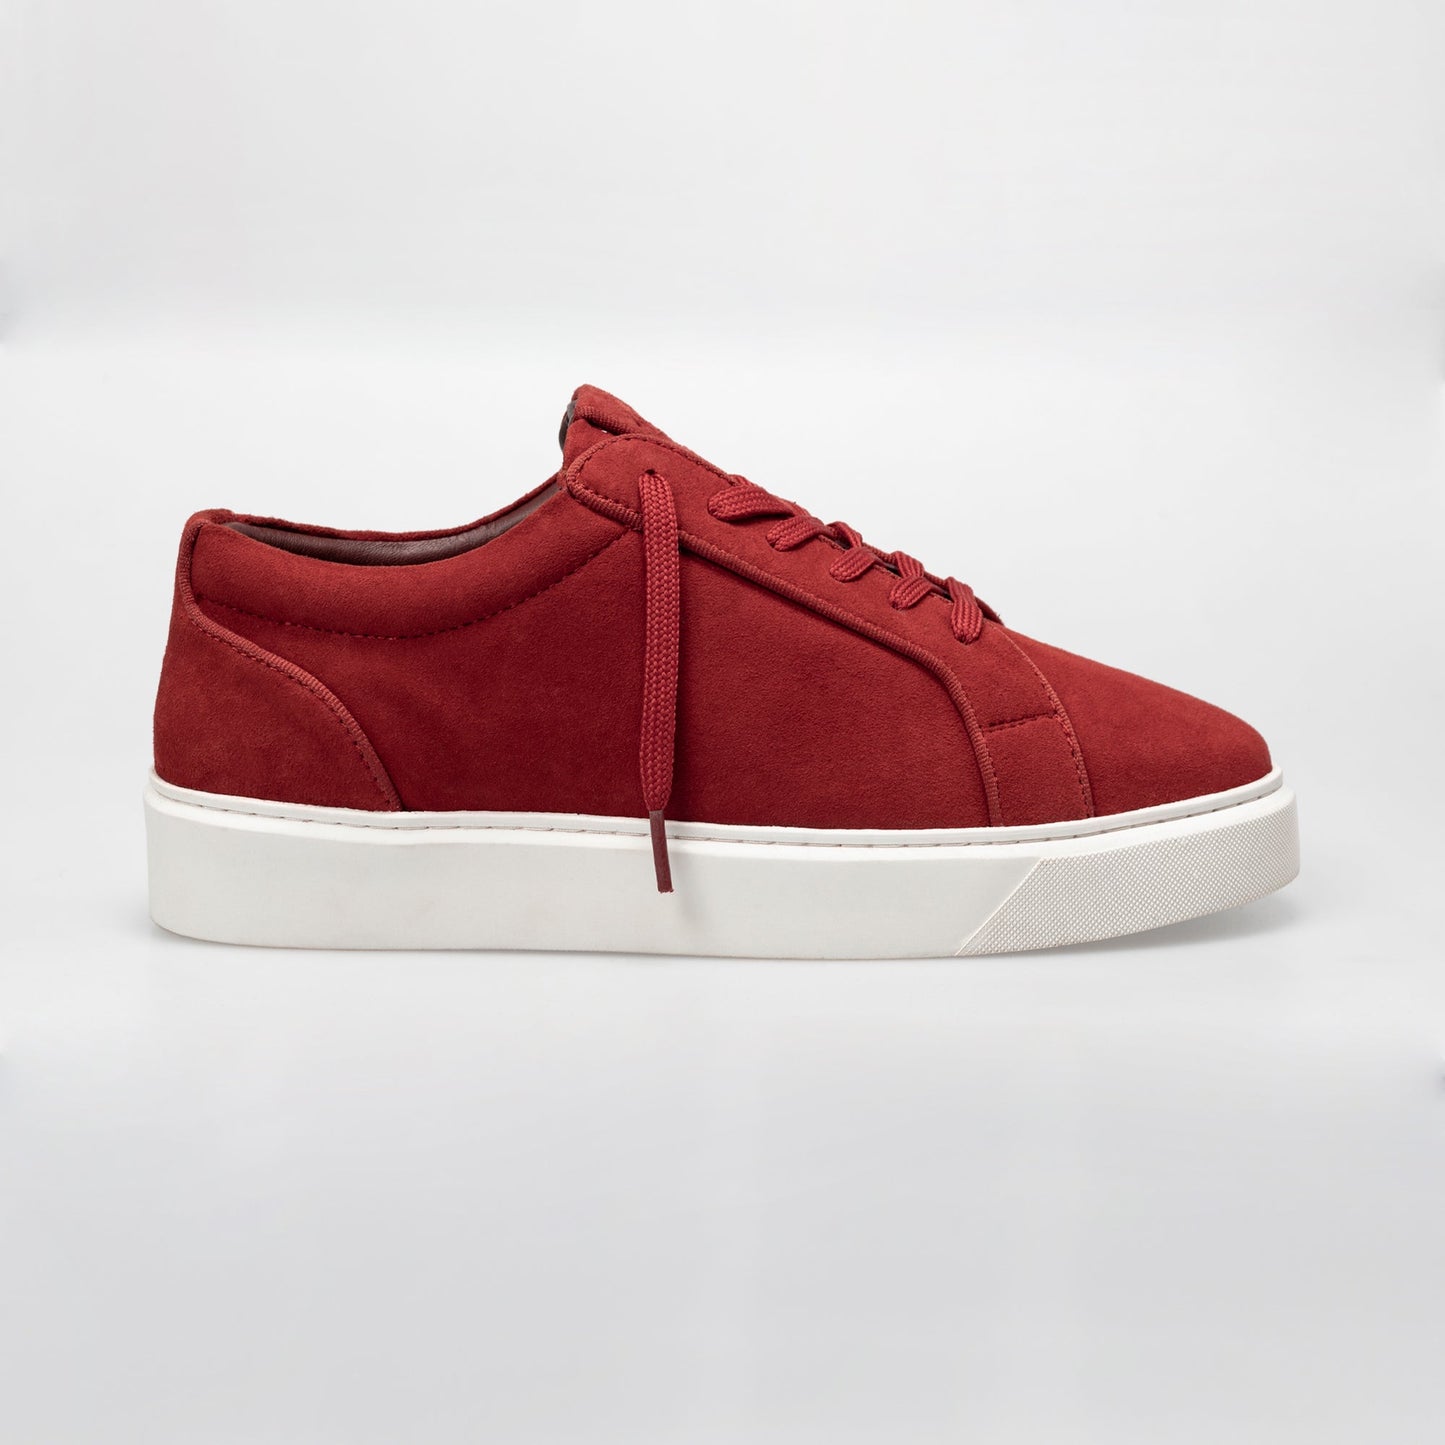 Red Suede Trainers - Trainers - 7 - THREADPEPPER